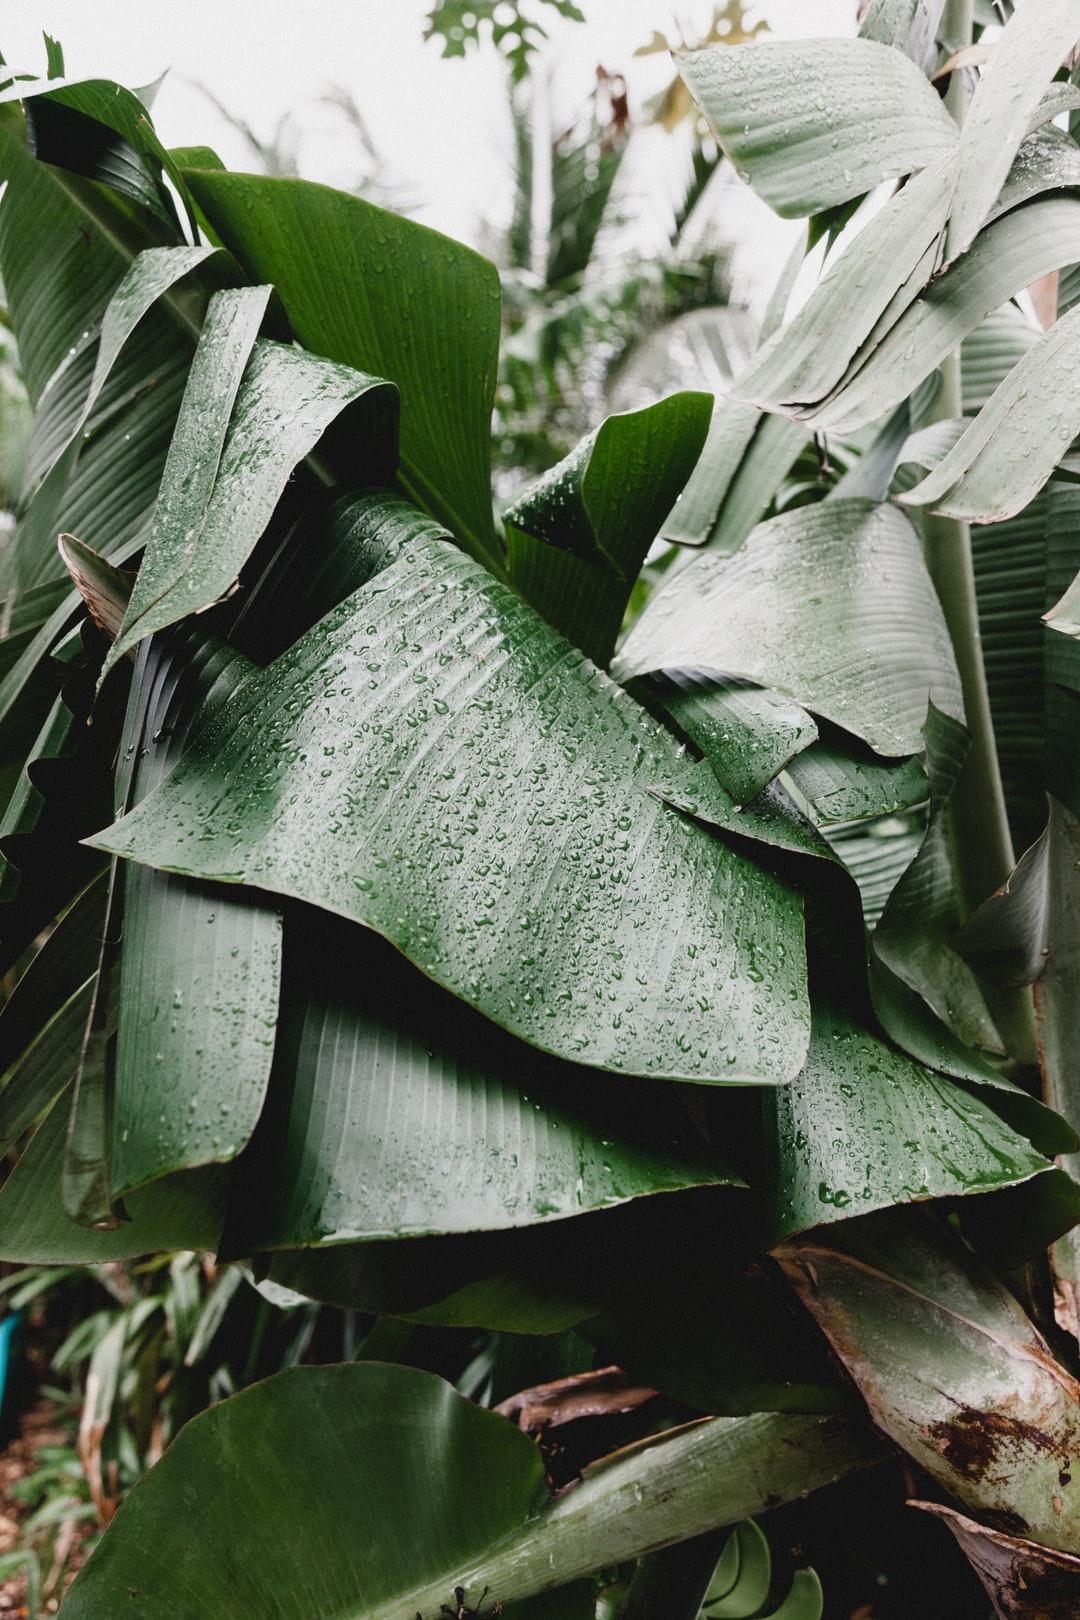 Banana Tree Picture. Download Free Image